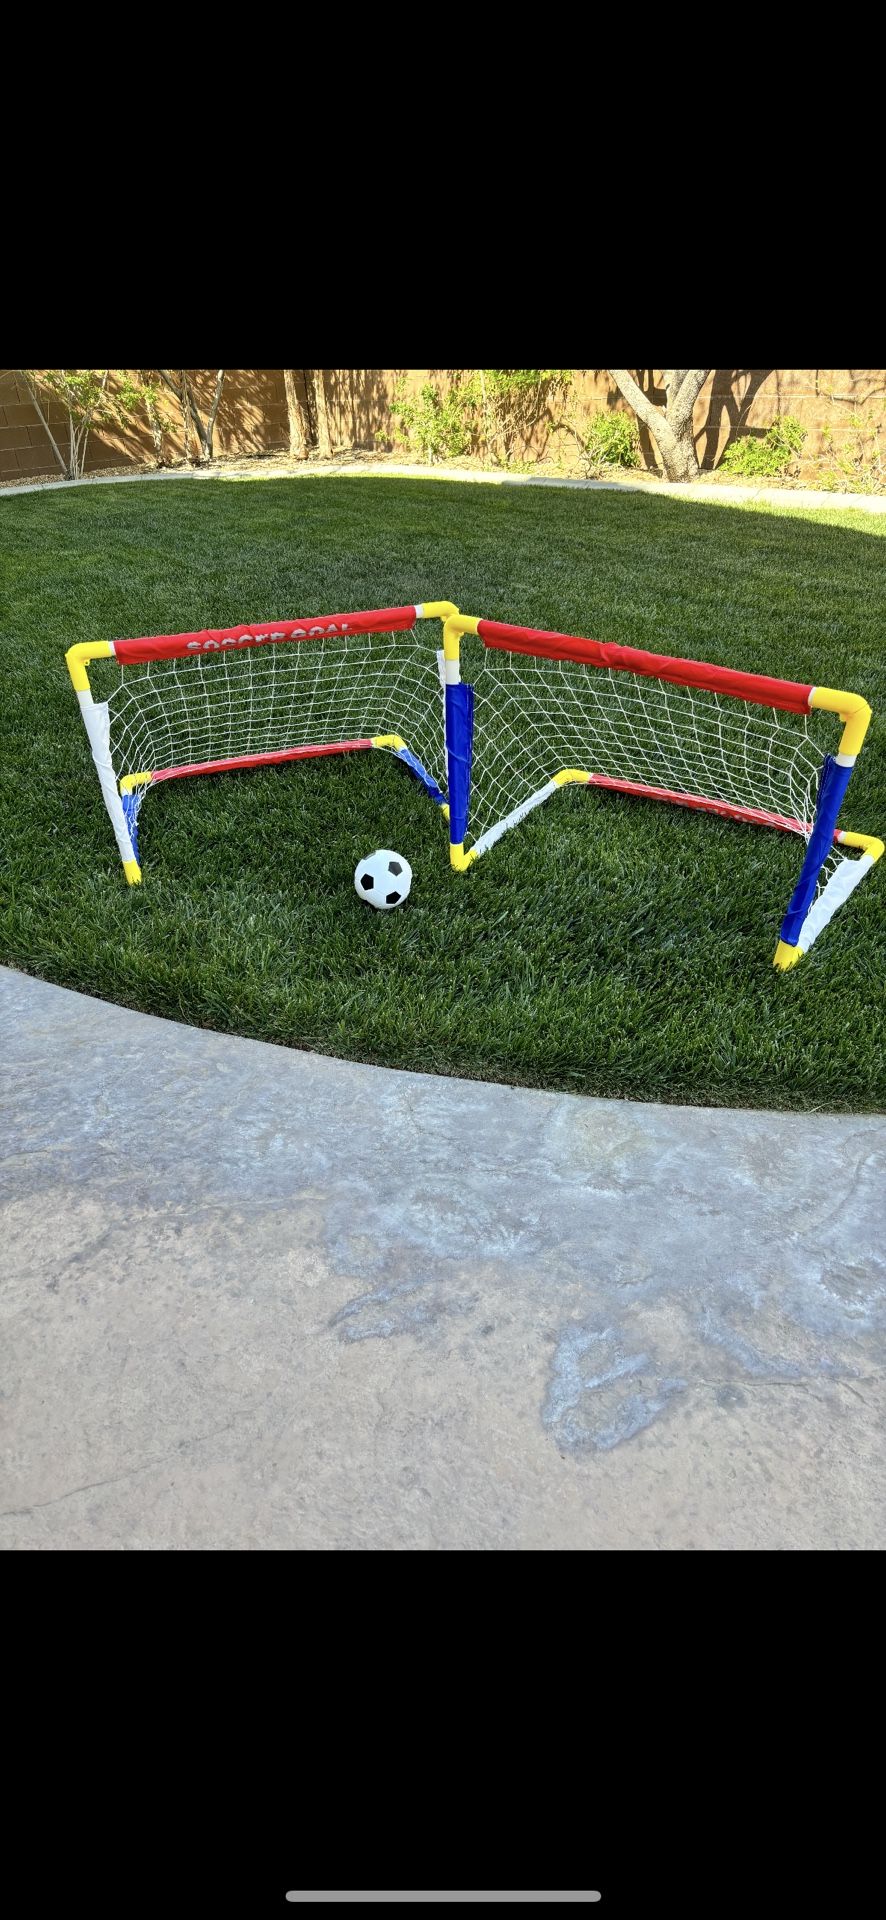 Toy Soccer Ball and Goals 